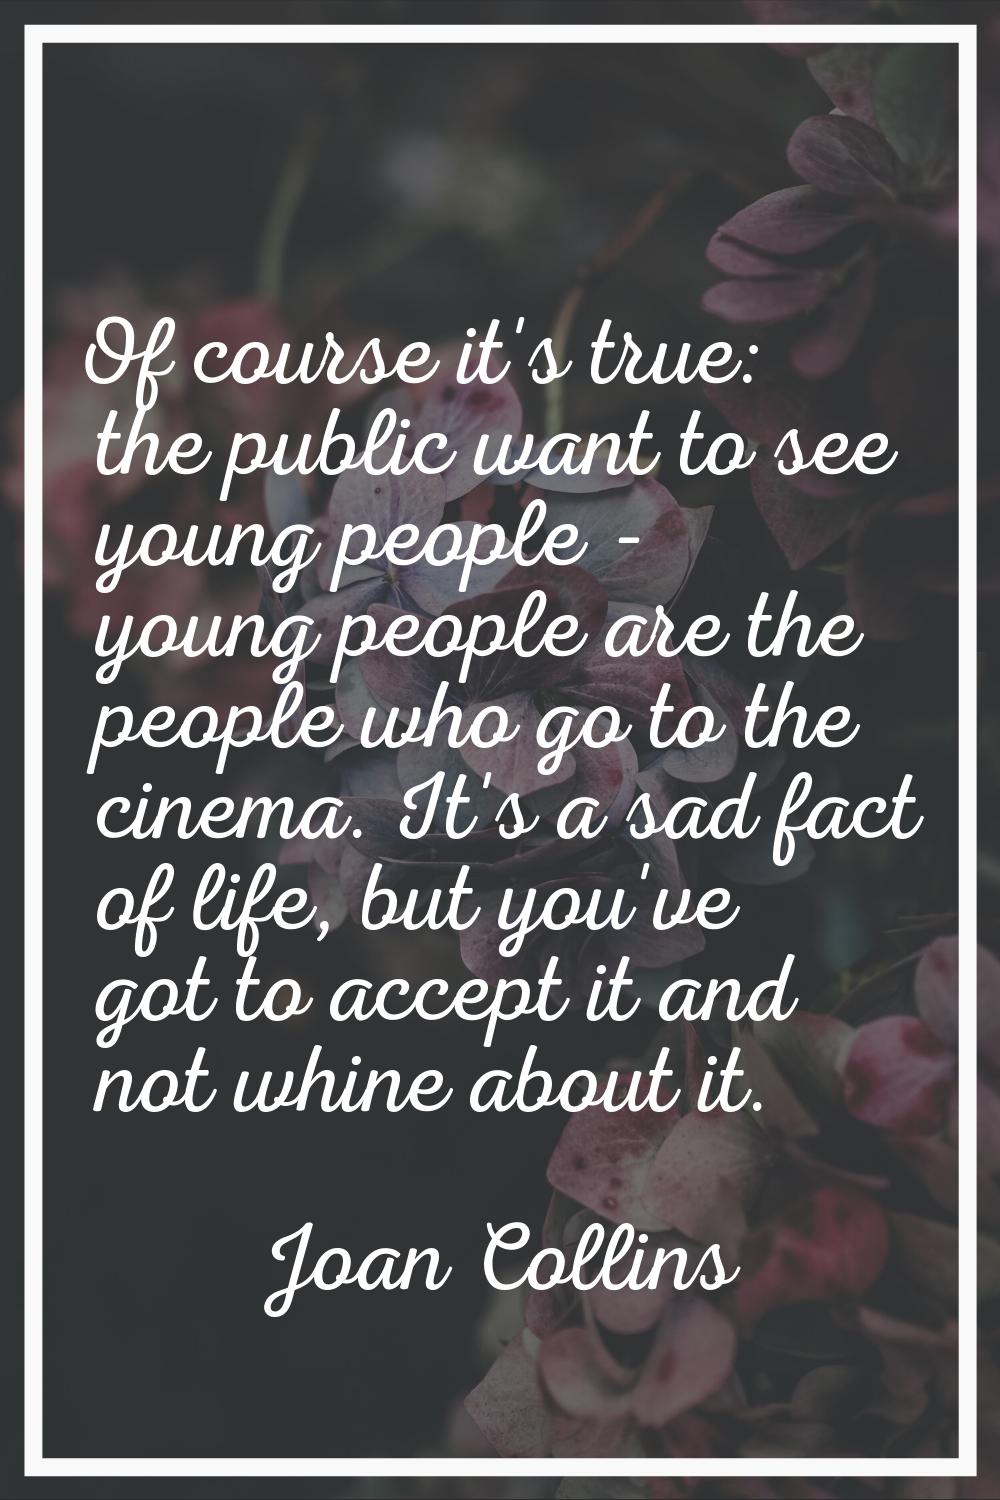 Of course it's true: the public want to see young people - young people are the people who go to th